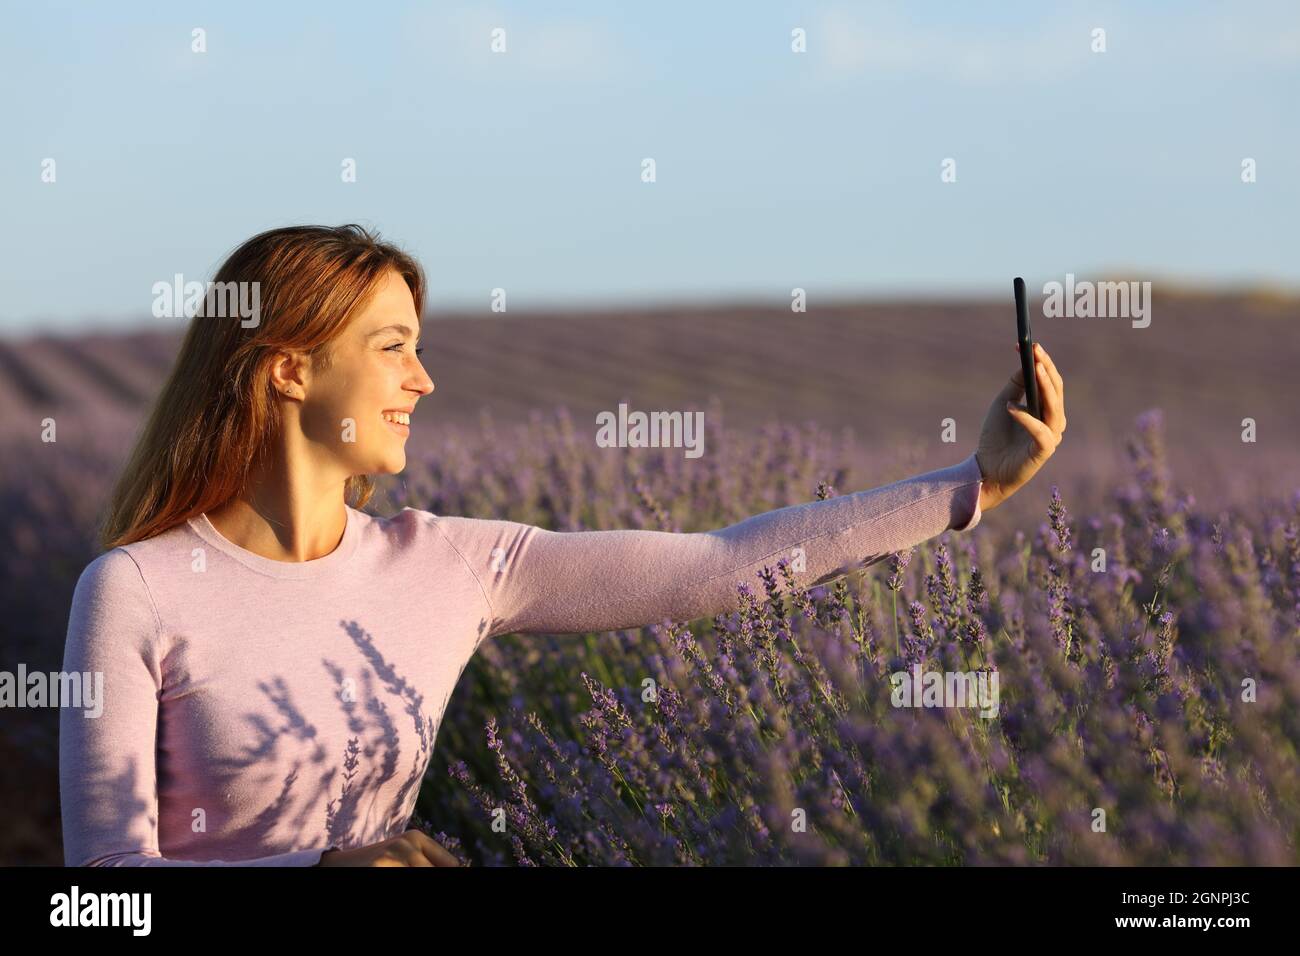 Profile of a happy woman taking selfie with smart phone in lavender field at sunset Stock Photo